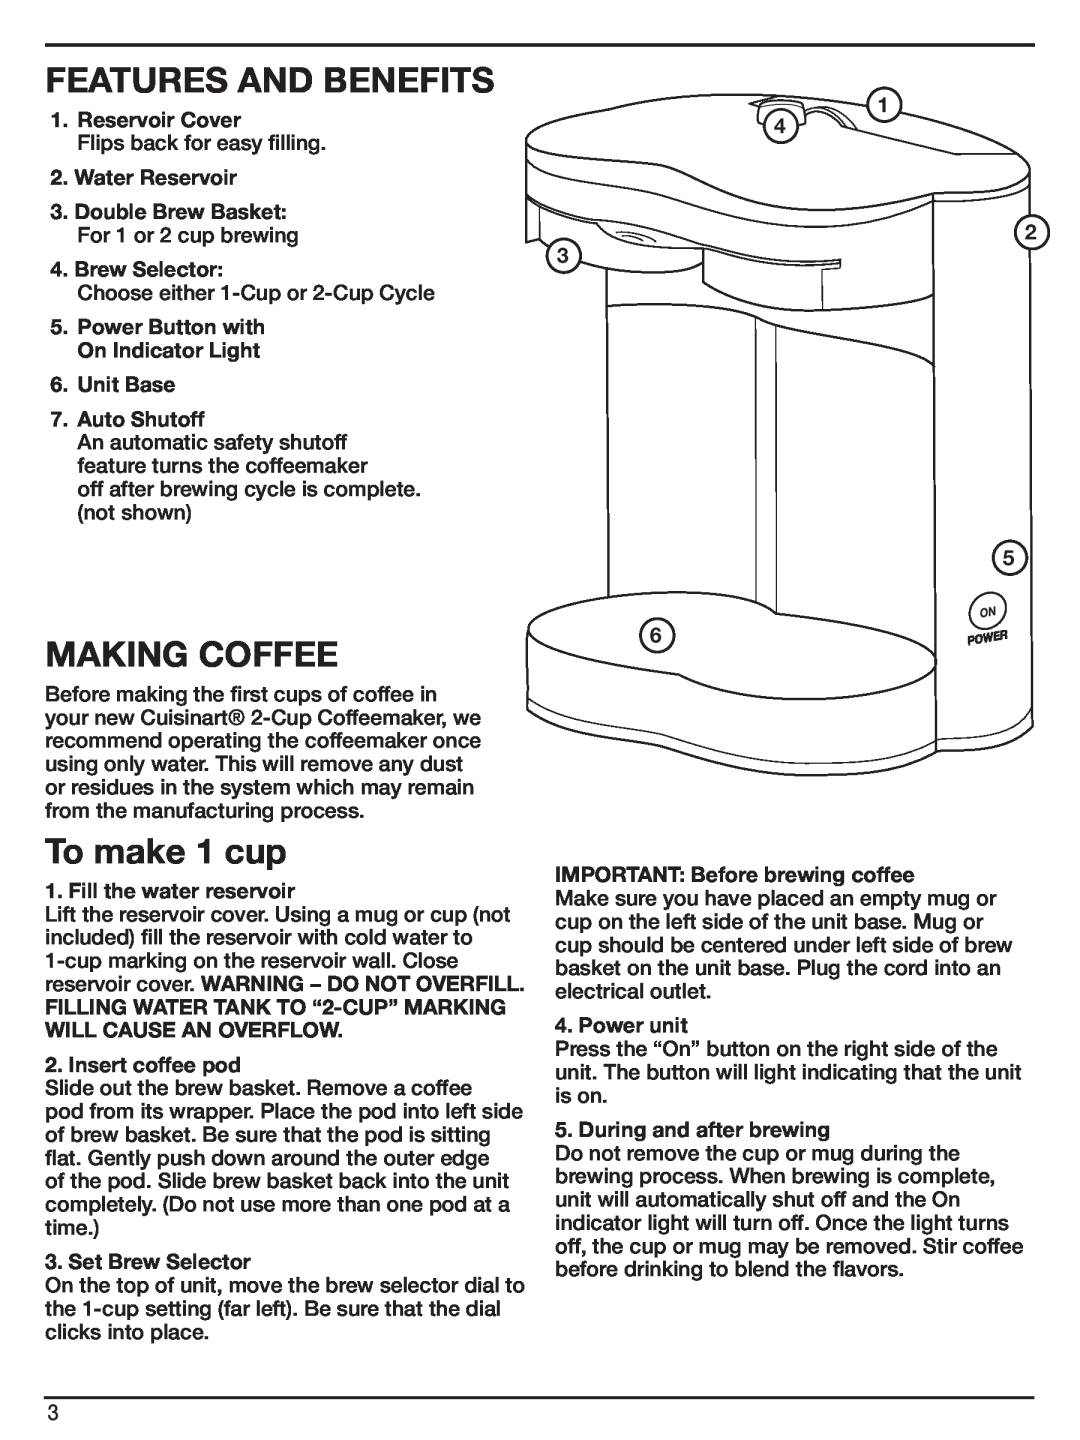 Cuisinart WCM-11SA Features And Benefits, Making Coffee, To make 1 cup, Reservoir Cover, Brew Selector, Insert coffee pod 